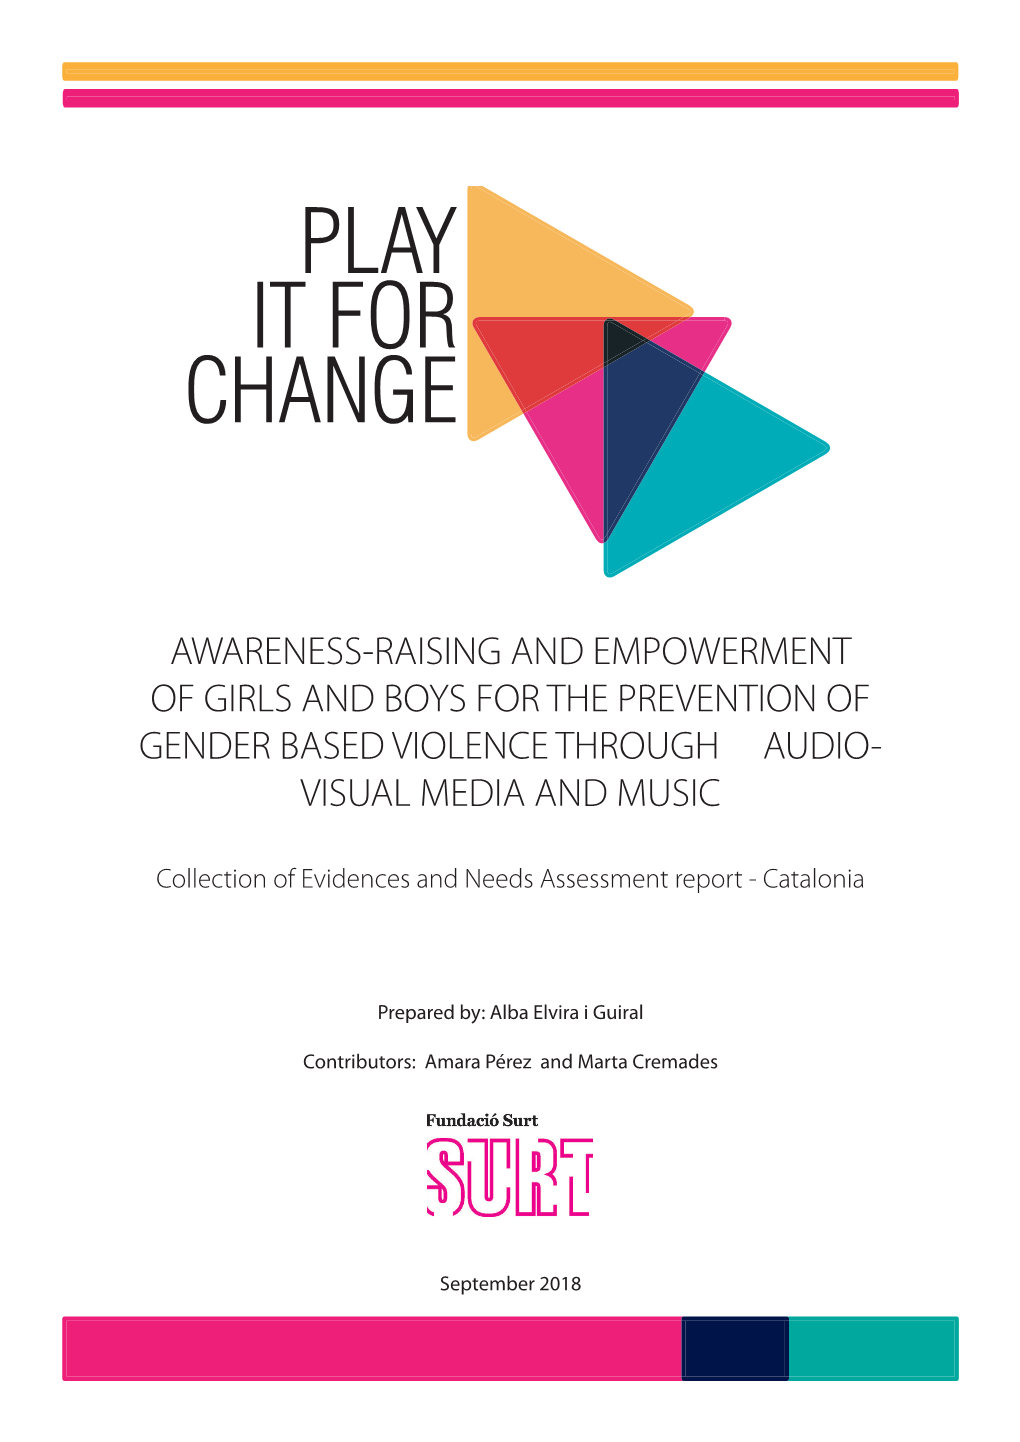 Awareness-Raising and Empowerment of Girls and Boys for the Prevention of Gender Based Violence Through Audio- Visual Media and Music